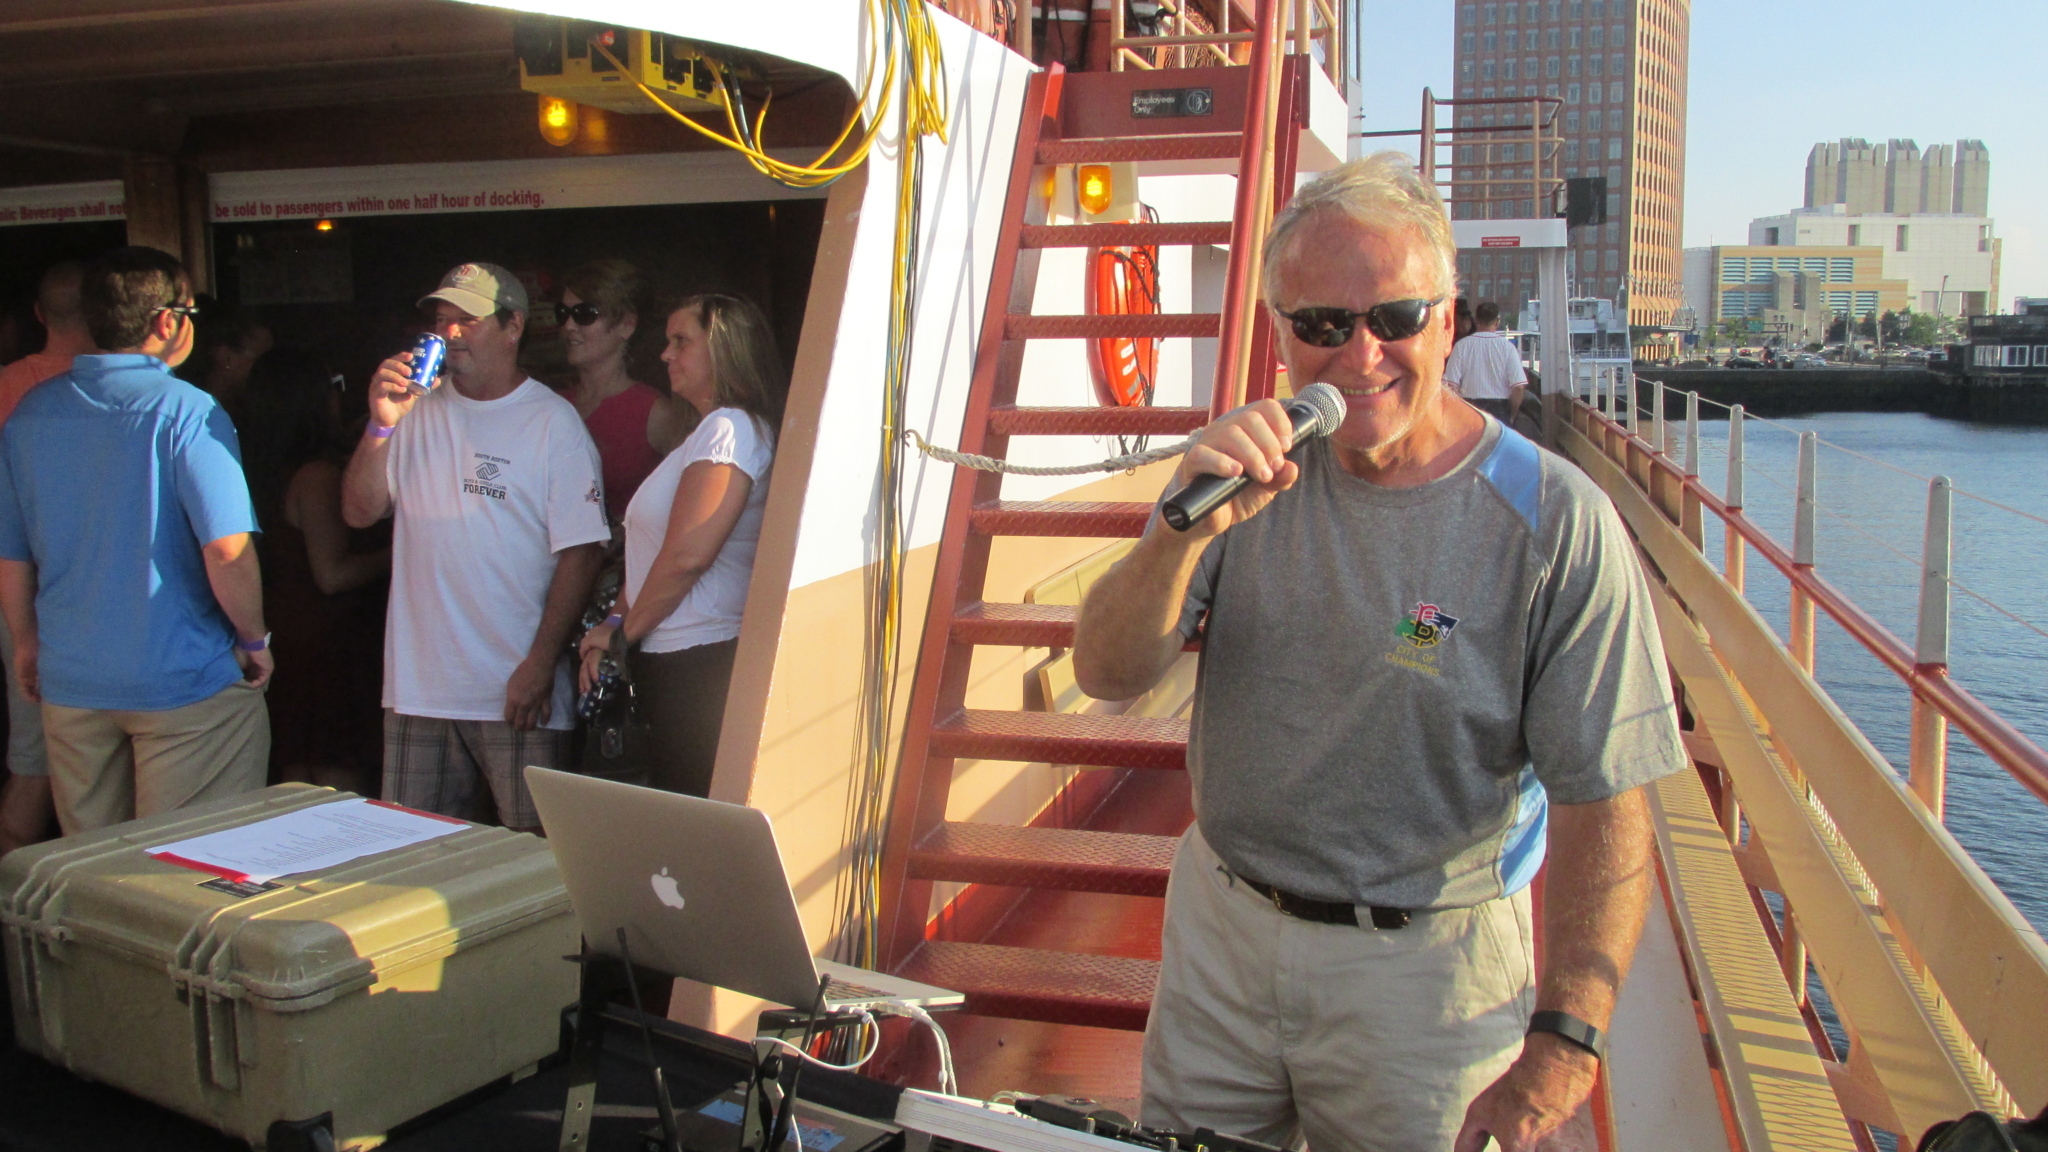 DJ Doug Lane WEEI, 93.7FM, spins the music on the July 6 Club Cruise. He’s also WEEI’s Sports Technical Director – hey, it was a triple double.